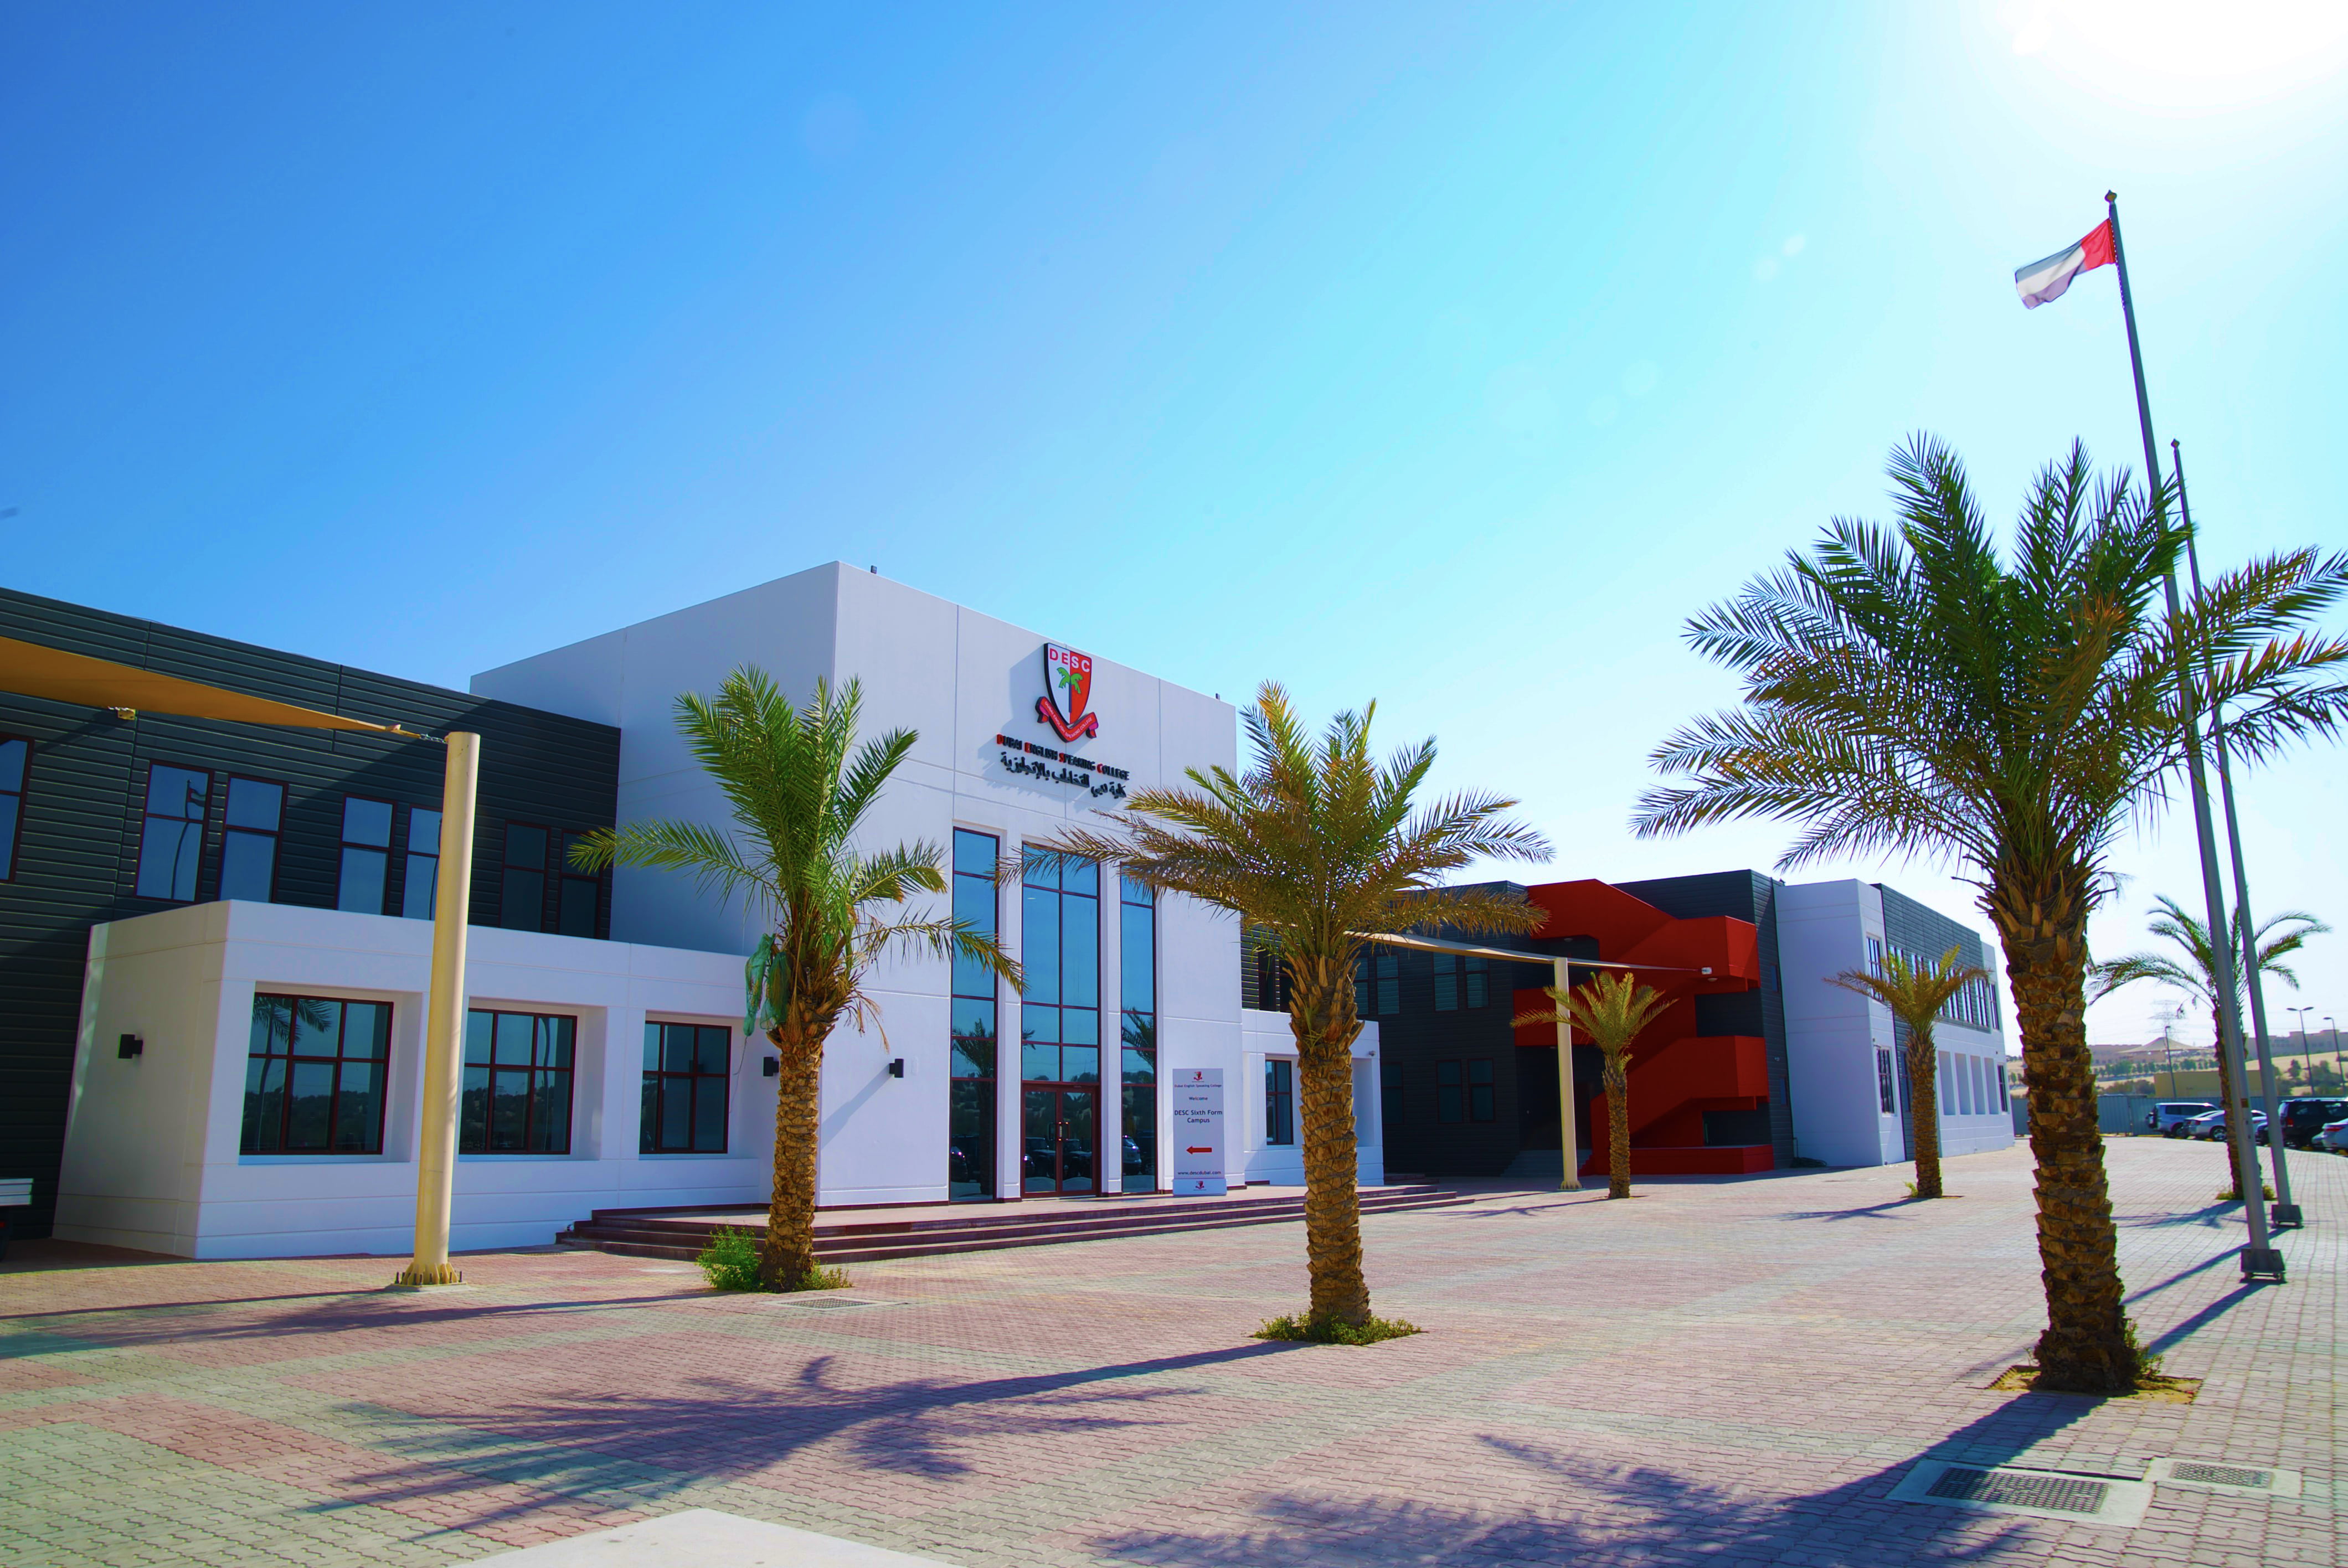 Photograph of Dubai English Speaking College showing the main entrance